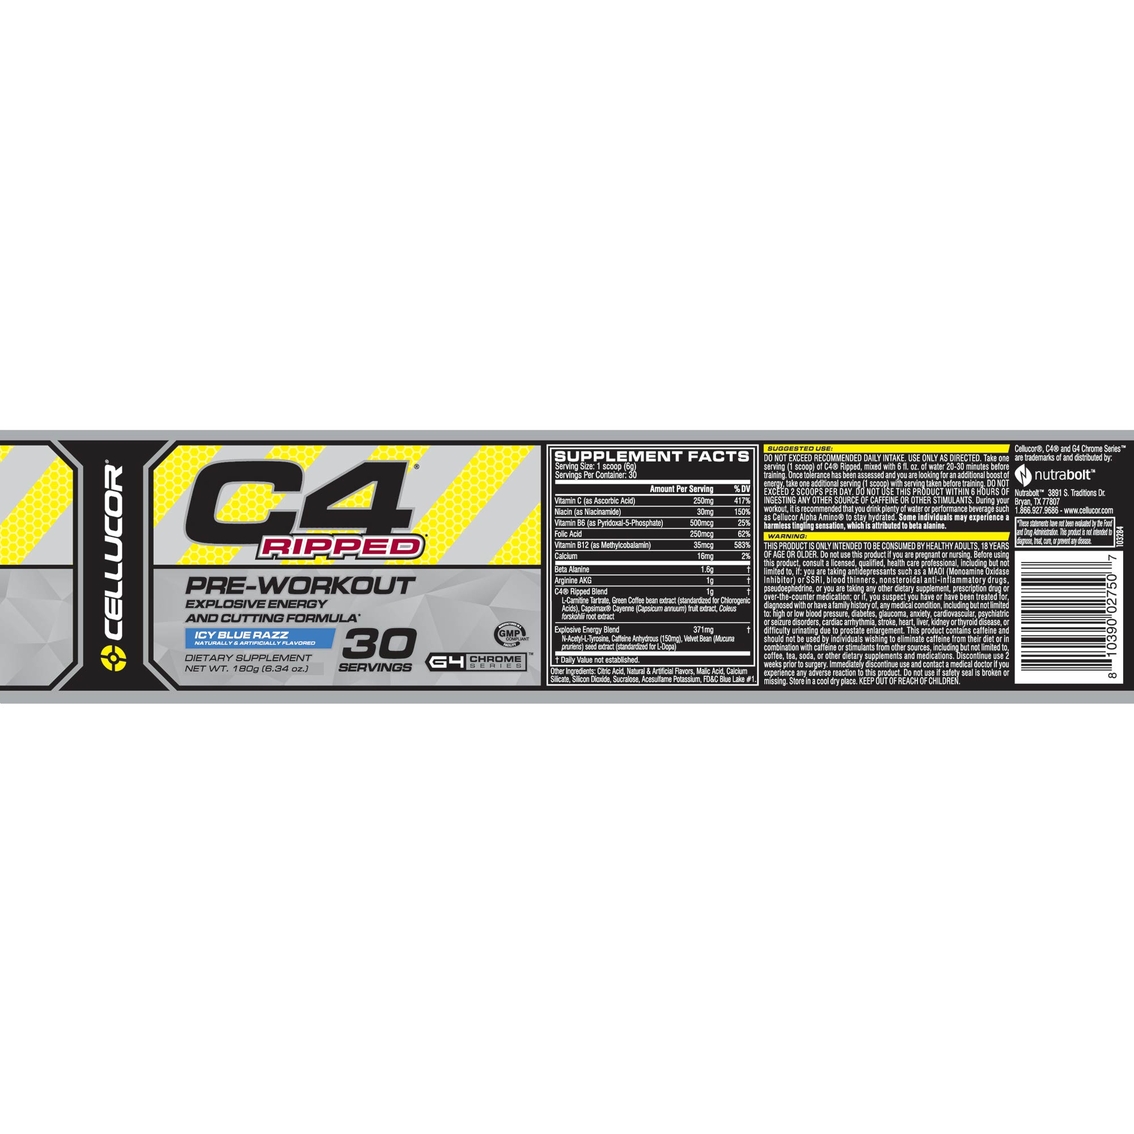 Cellucor C4 Ripped Pre-Workout Supplement - Image 2 of 2